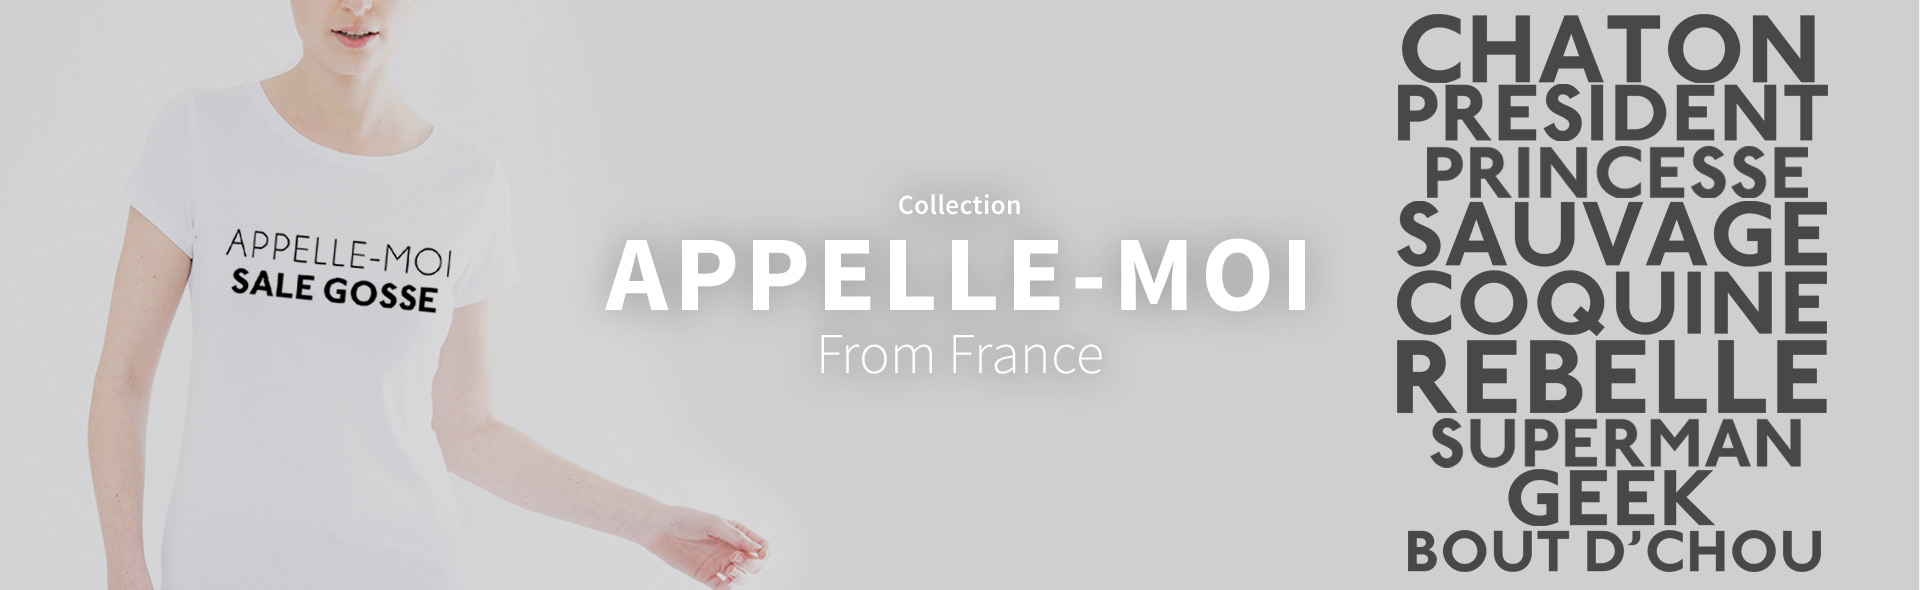 Collection Appelle-Moi